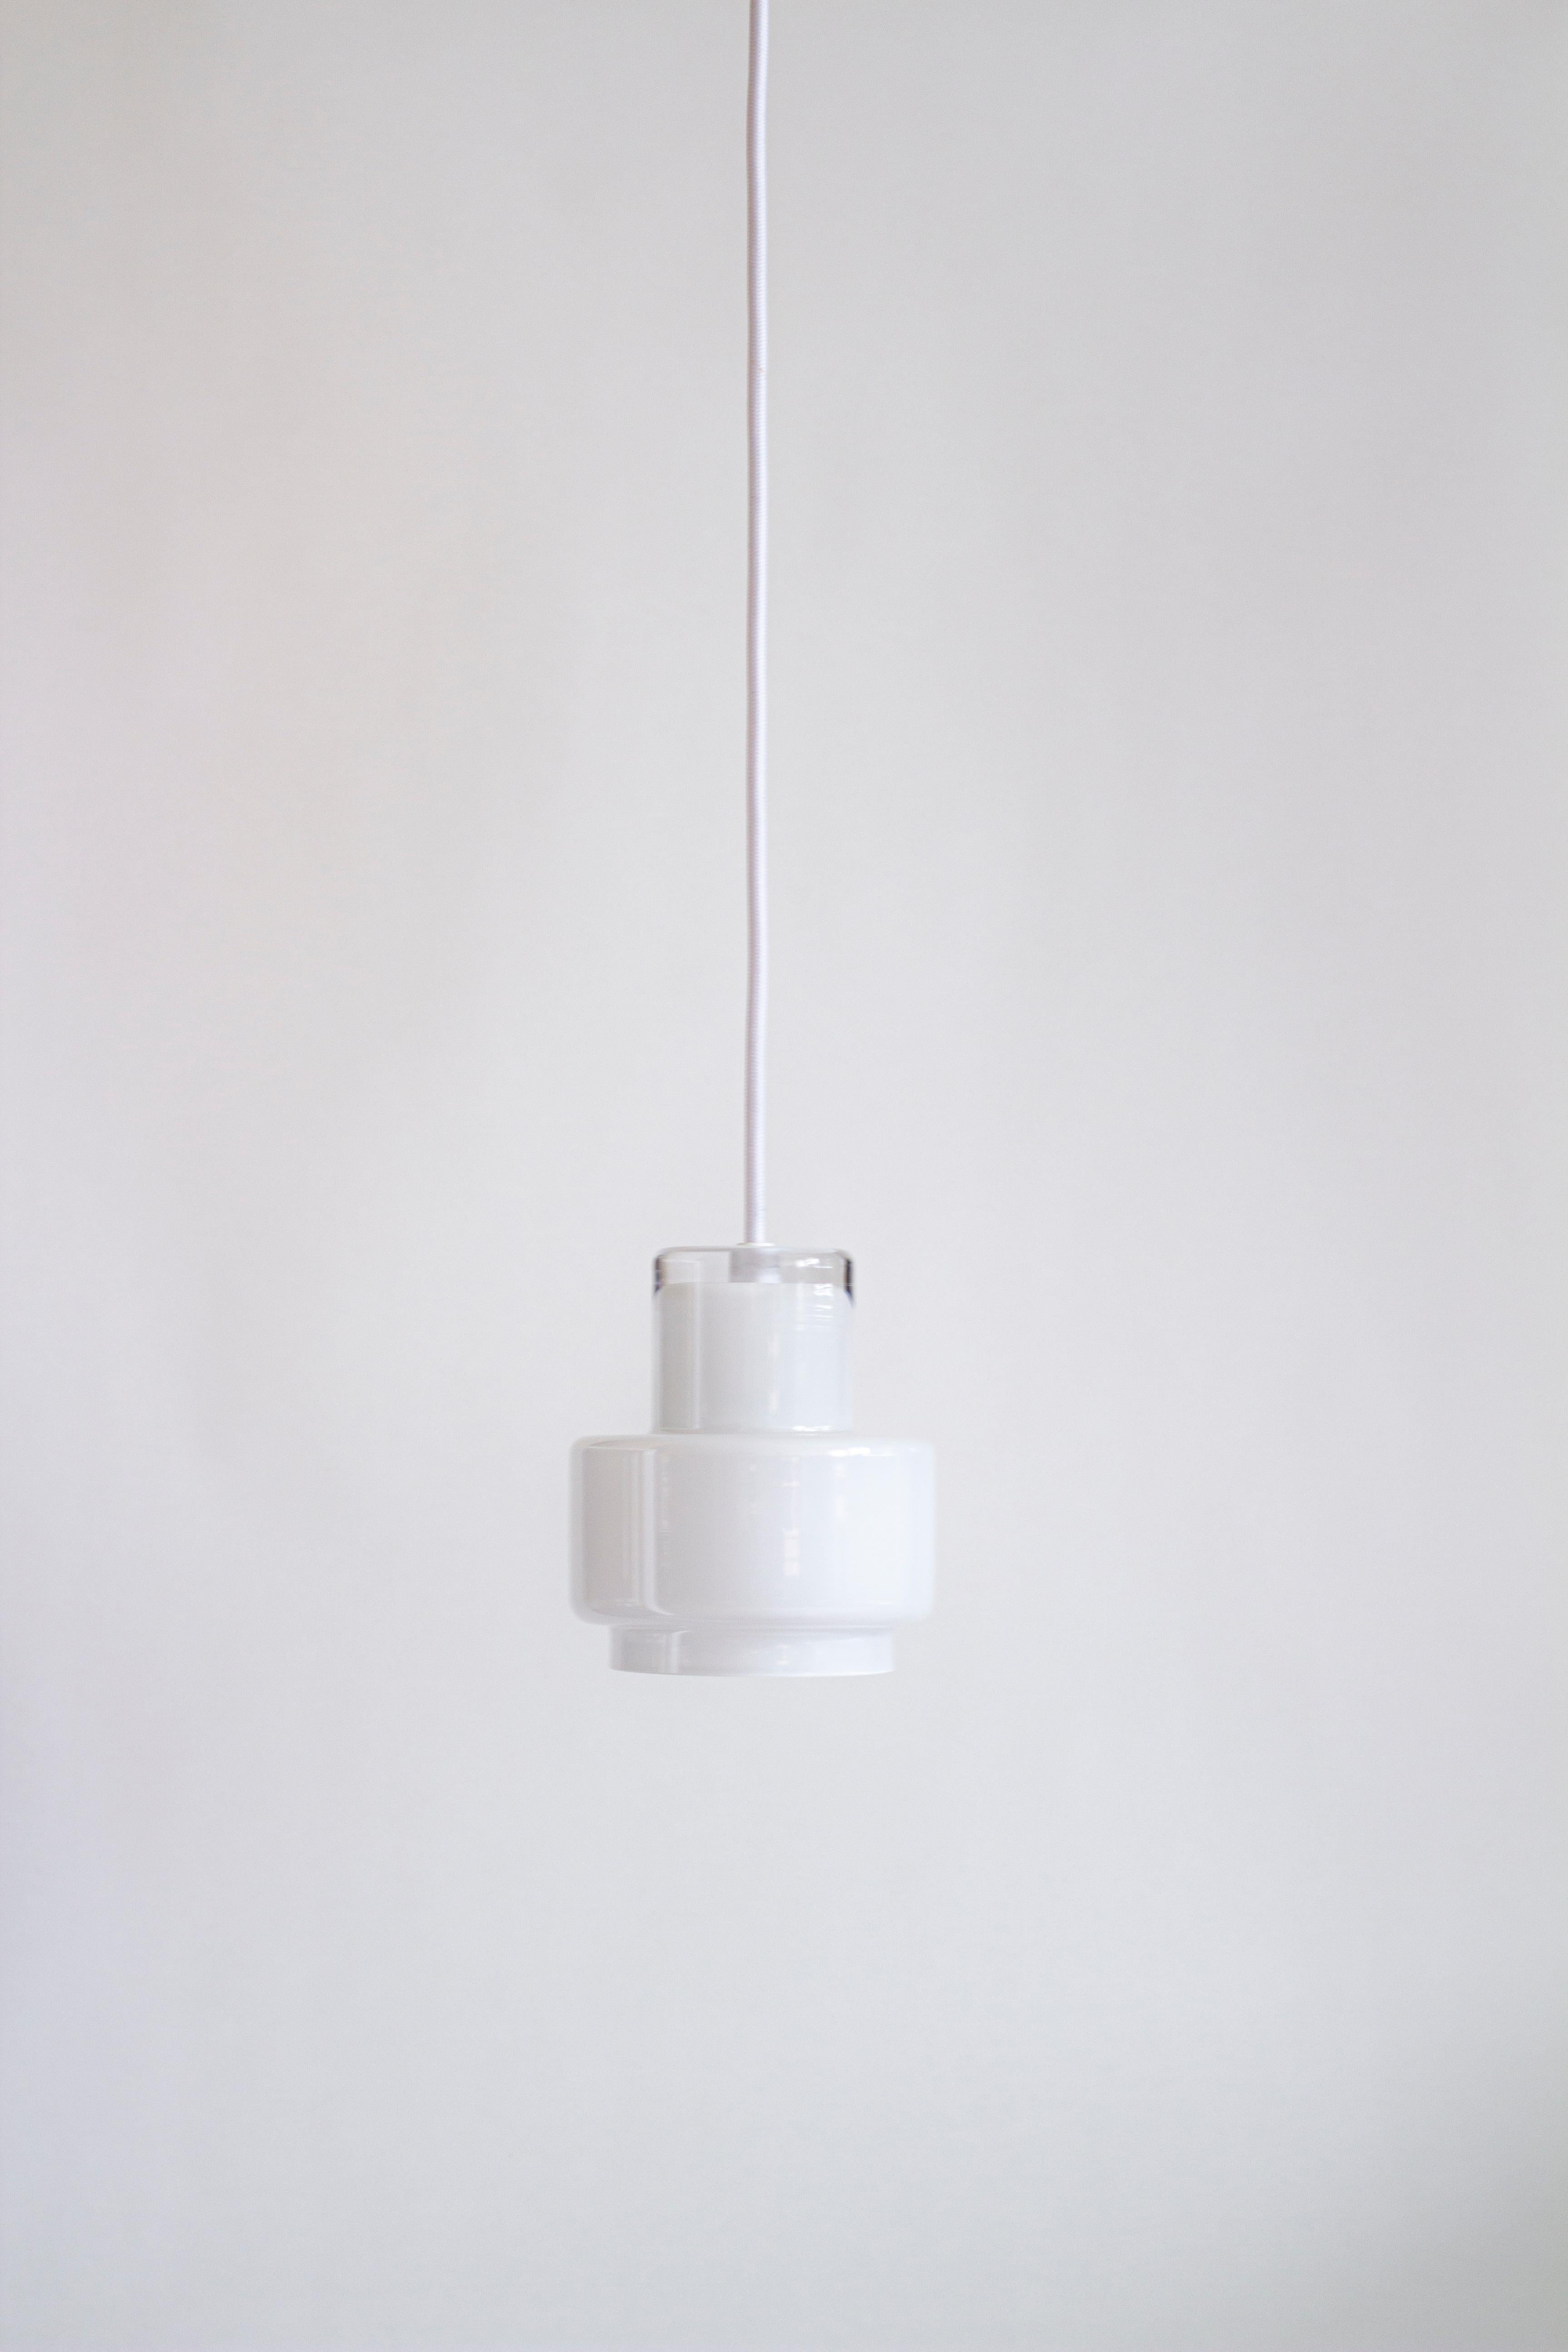 'Multi M' Glass Pendant in Black by Jokinen and Konu for Innolux 7